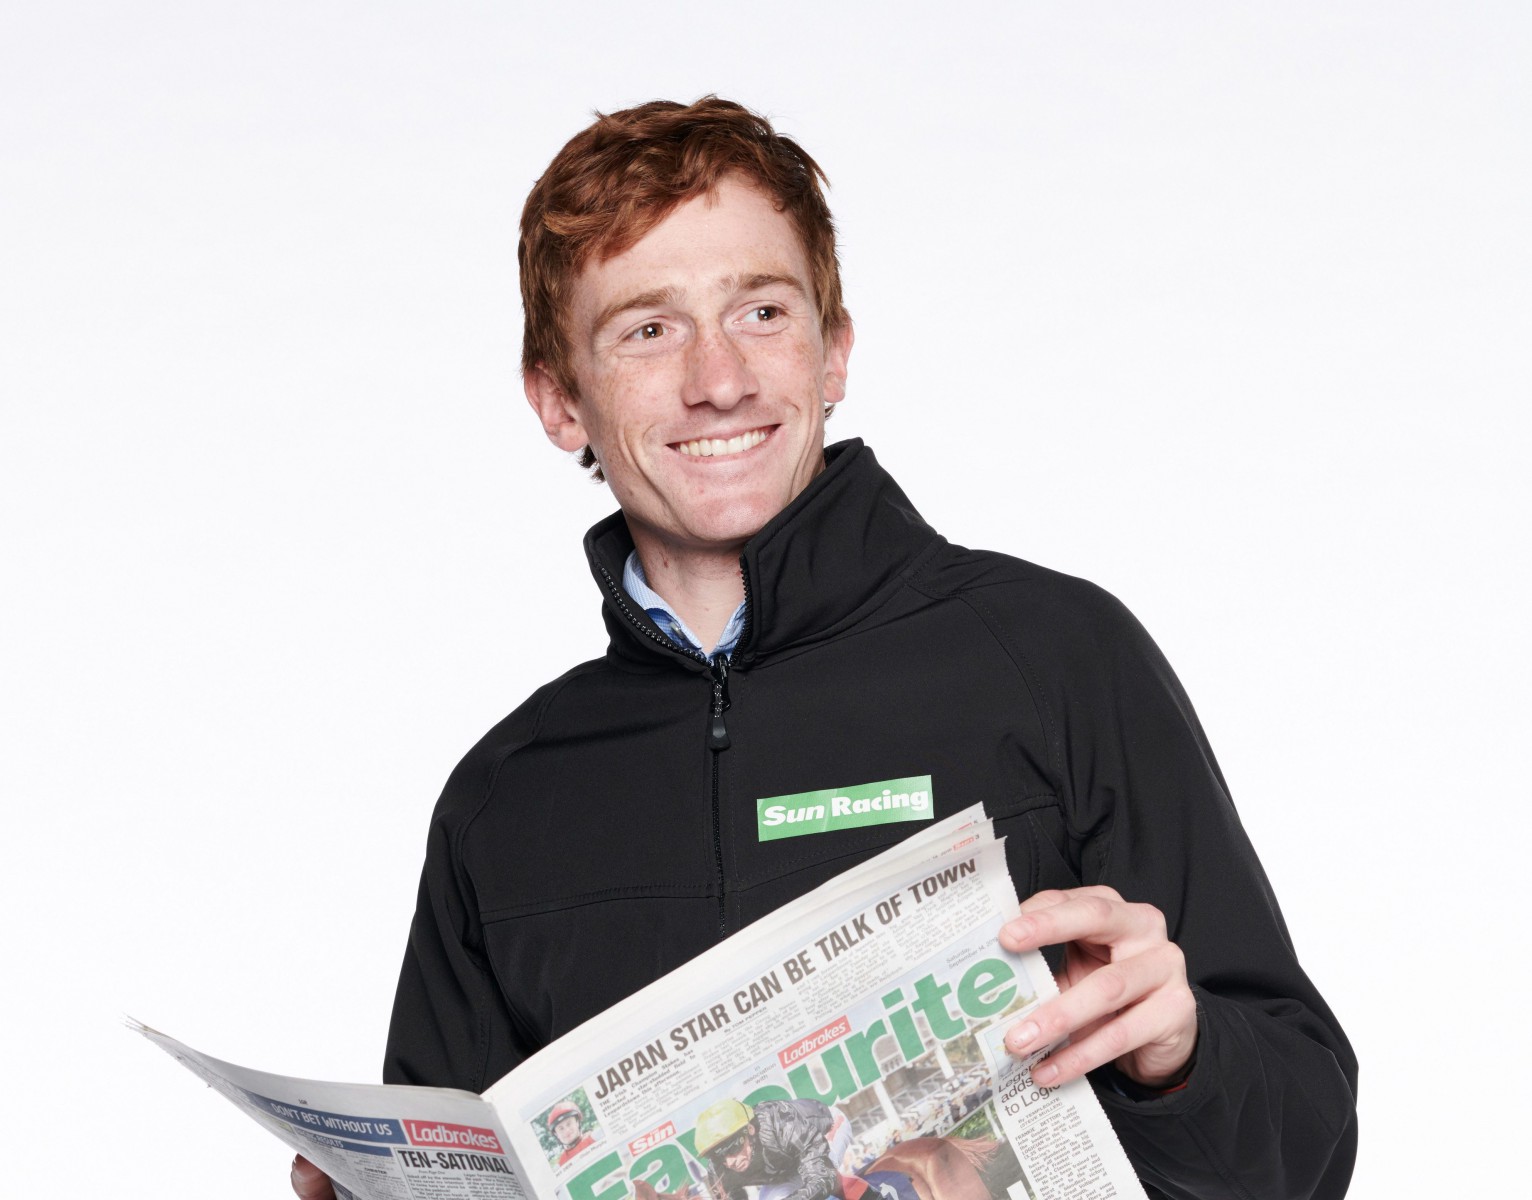 , Our man Sam Twiston-Davies on his book of rides at Bangor and the Ladbrokes Trophy at Newbury